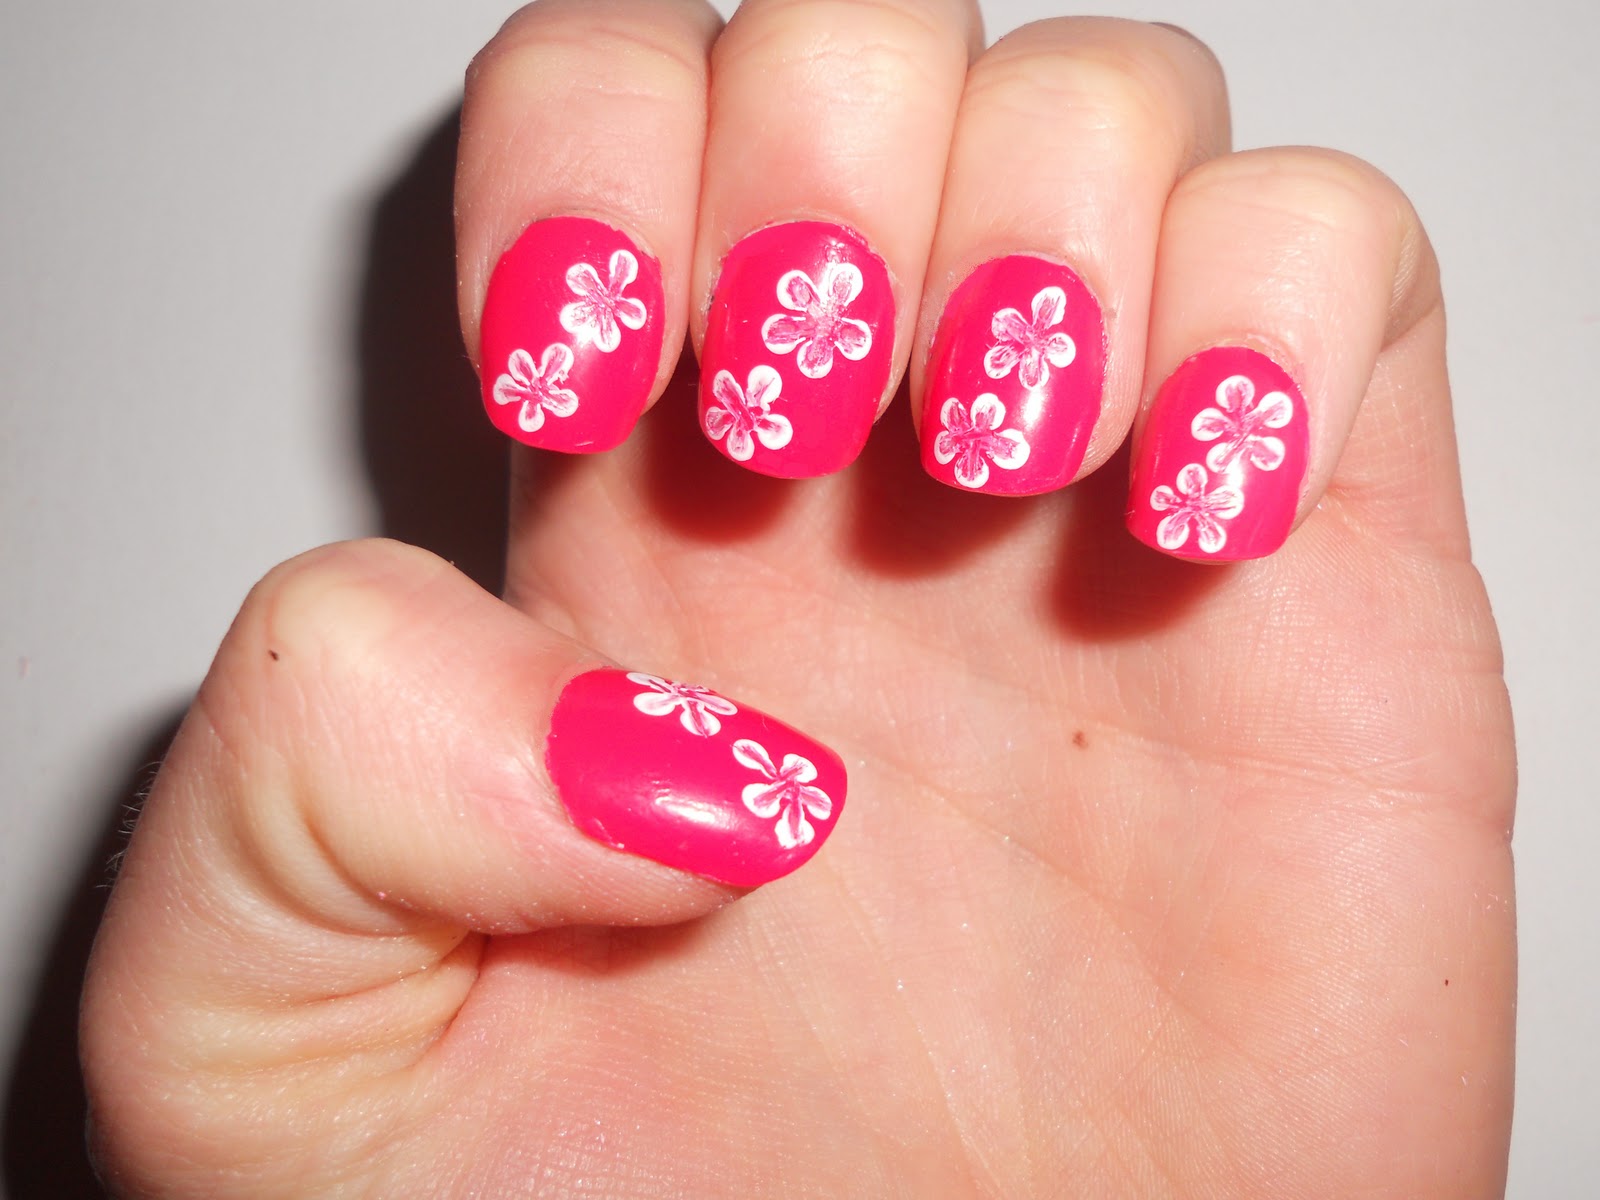 6. Floral Nail Art Ideas for Summer - wide 7